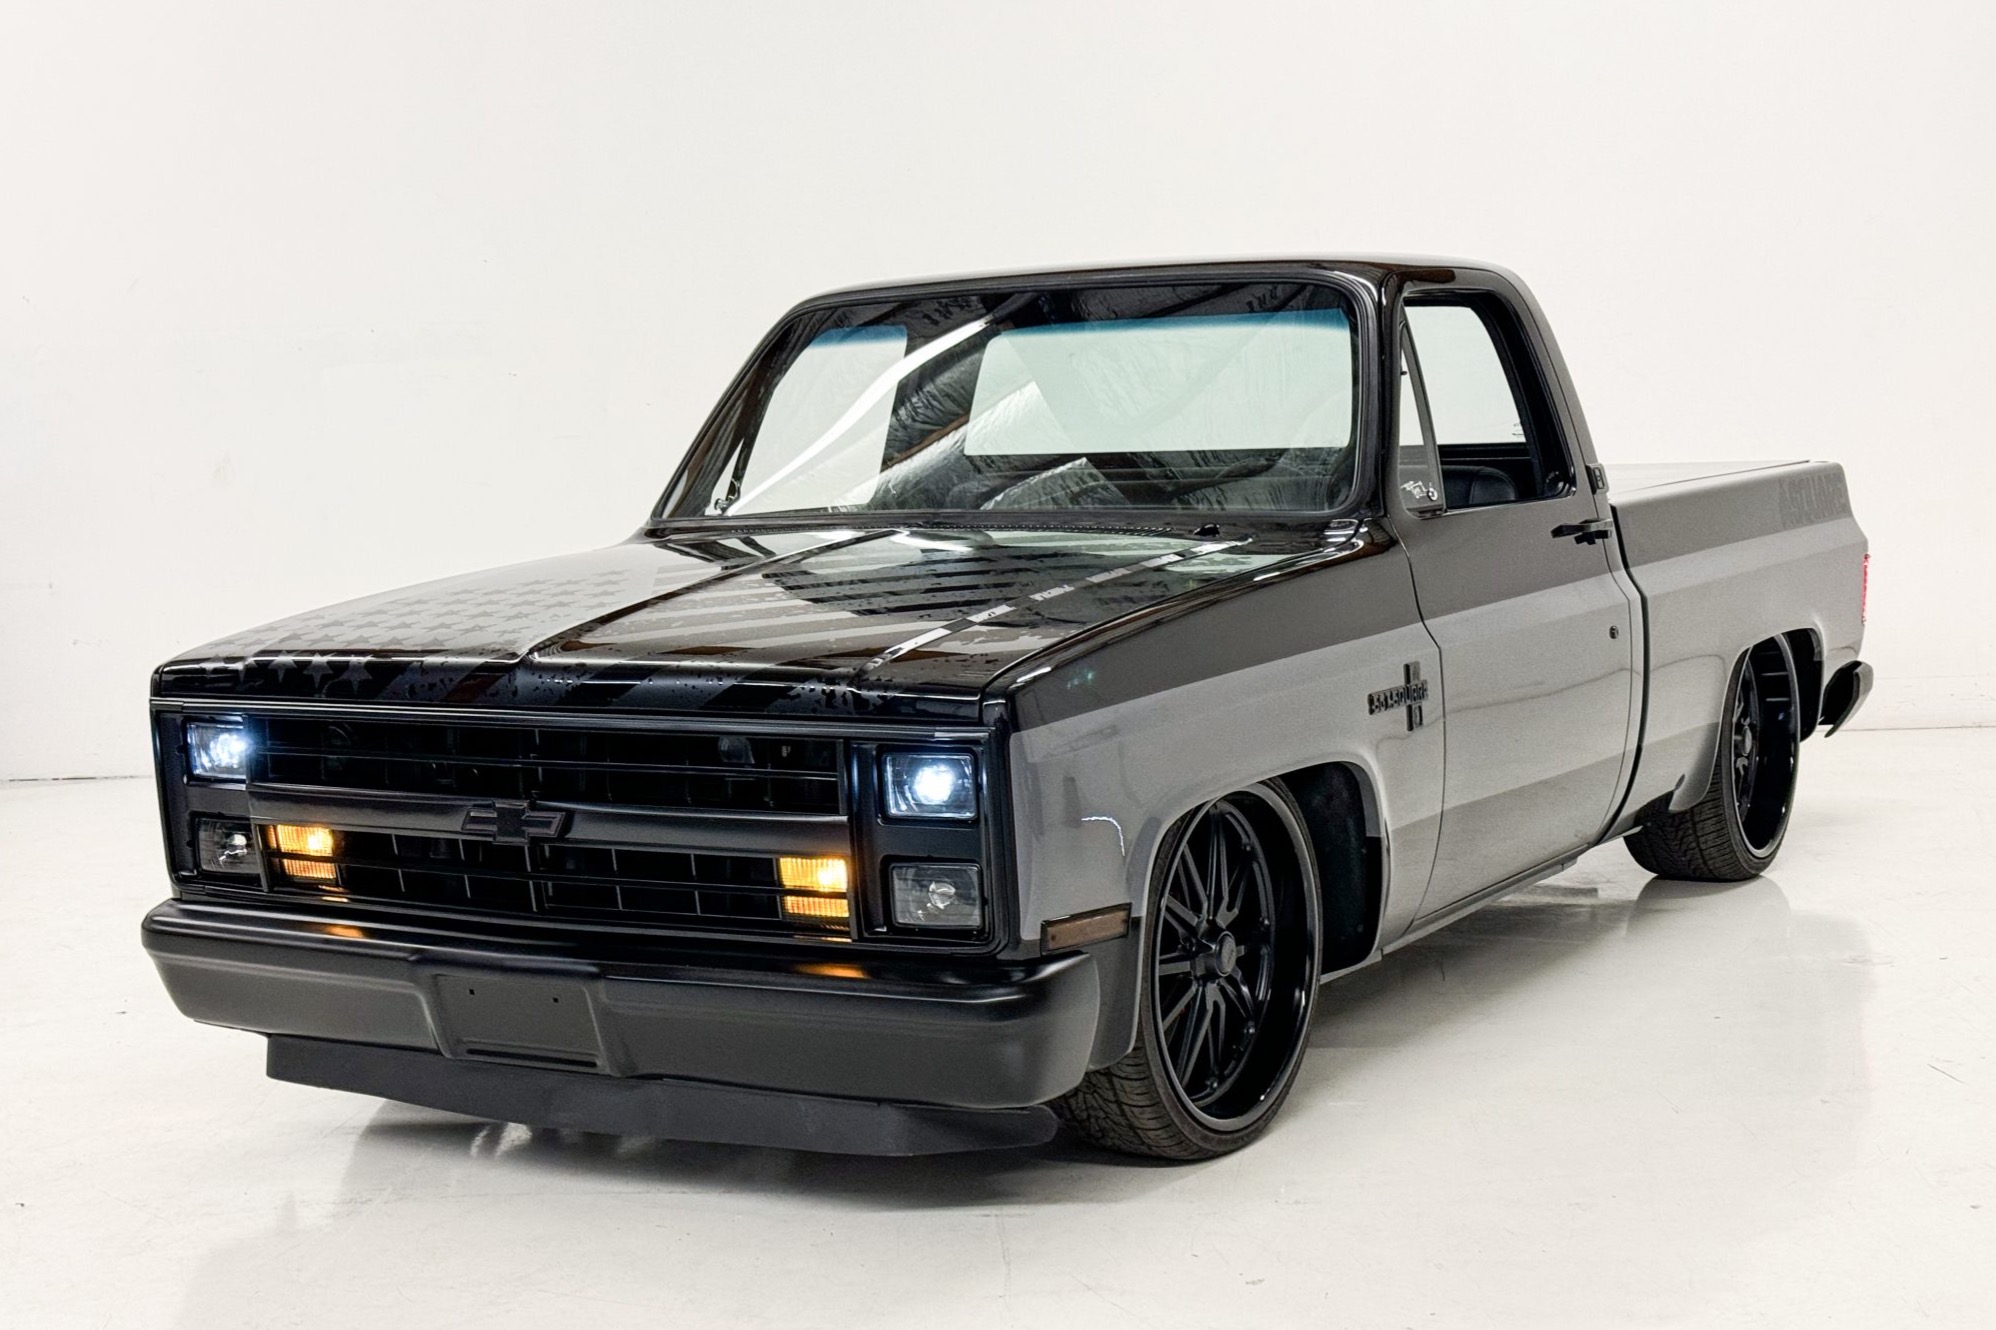 Used Modified 1985 Chevrolet C10 Pickup Review